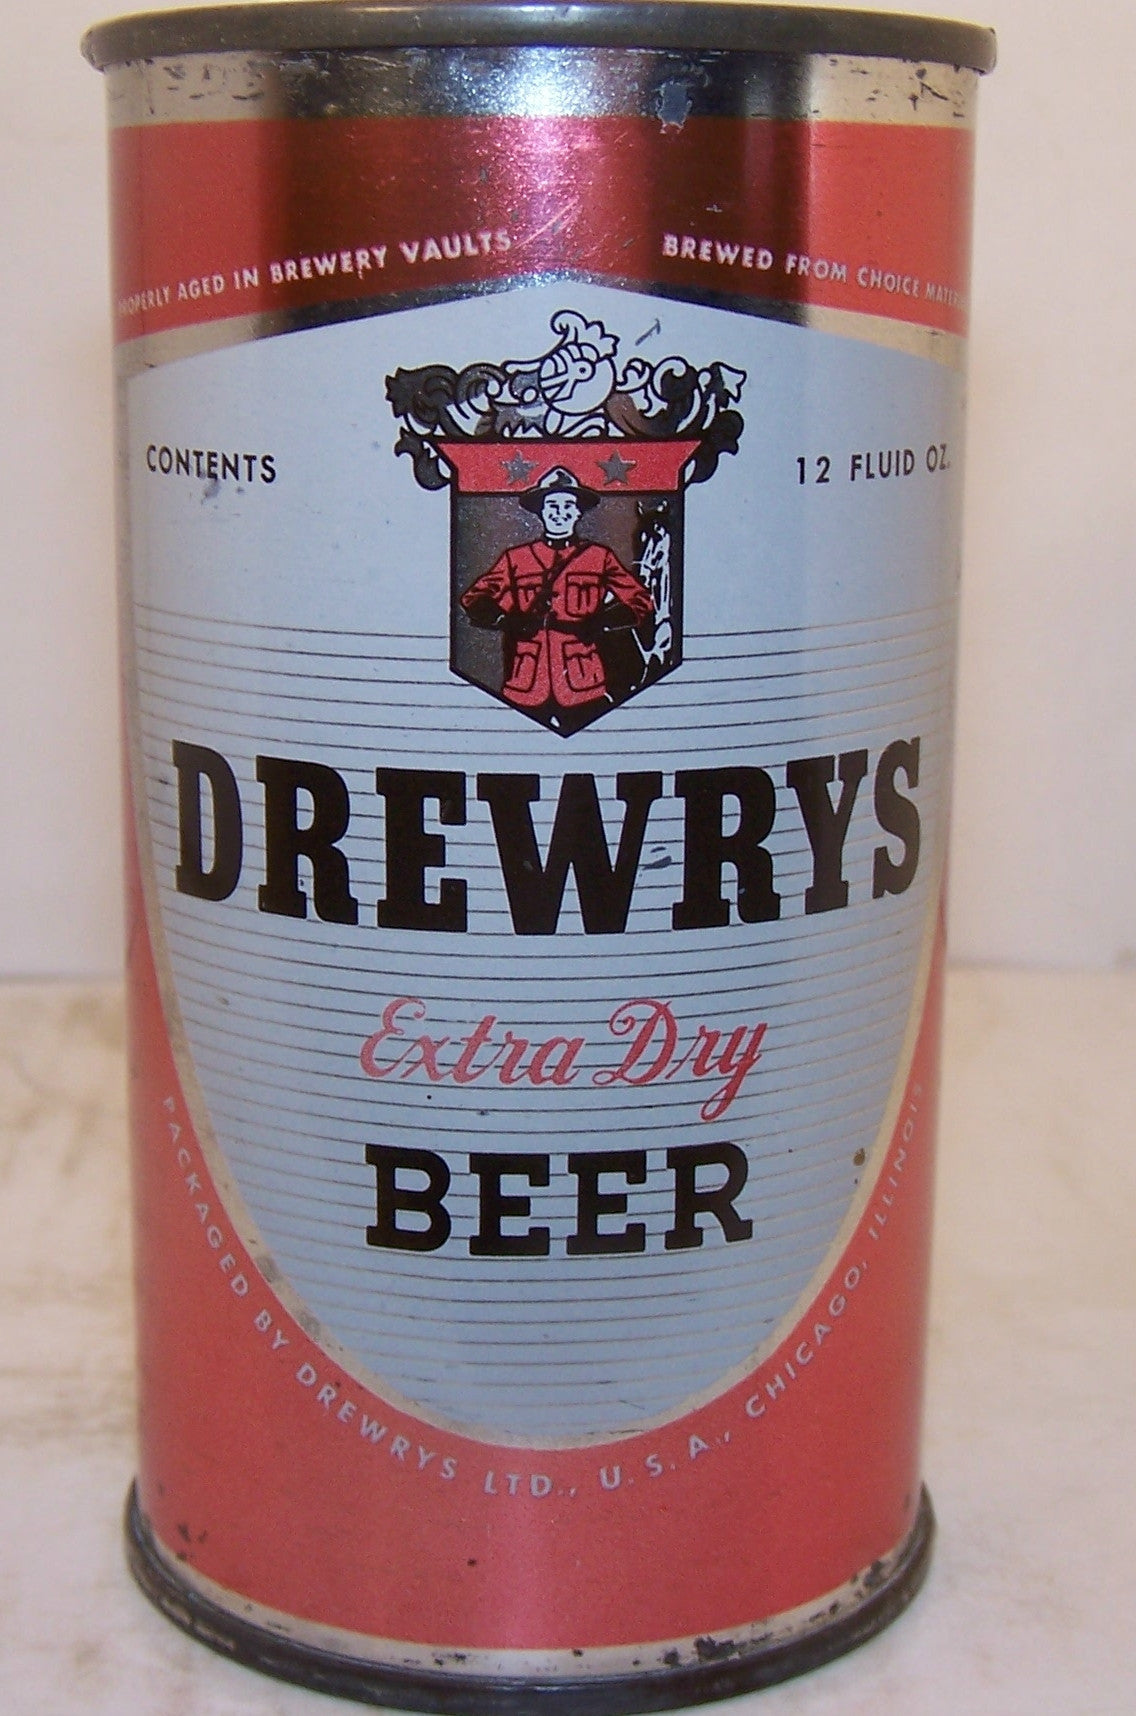 Drewrys Extra Dry Beer, USBC 54-33 Chicago, Grade 1- sold on 09/15/16